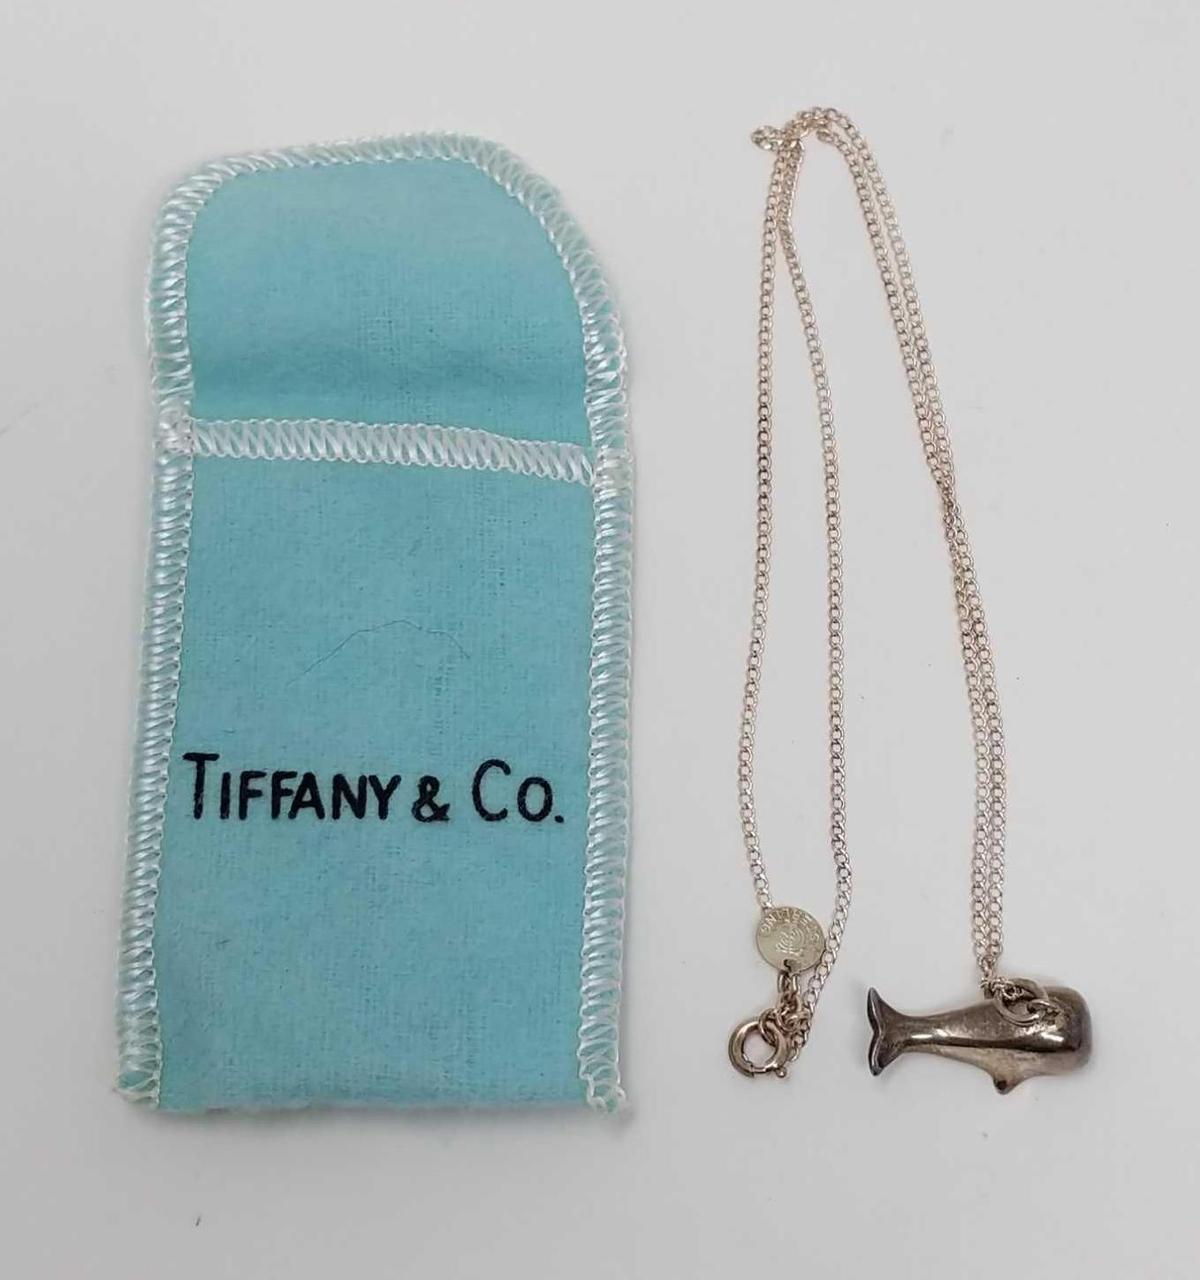 Tiffany & Co. Necklace with Whale Pendant